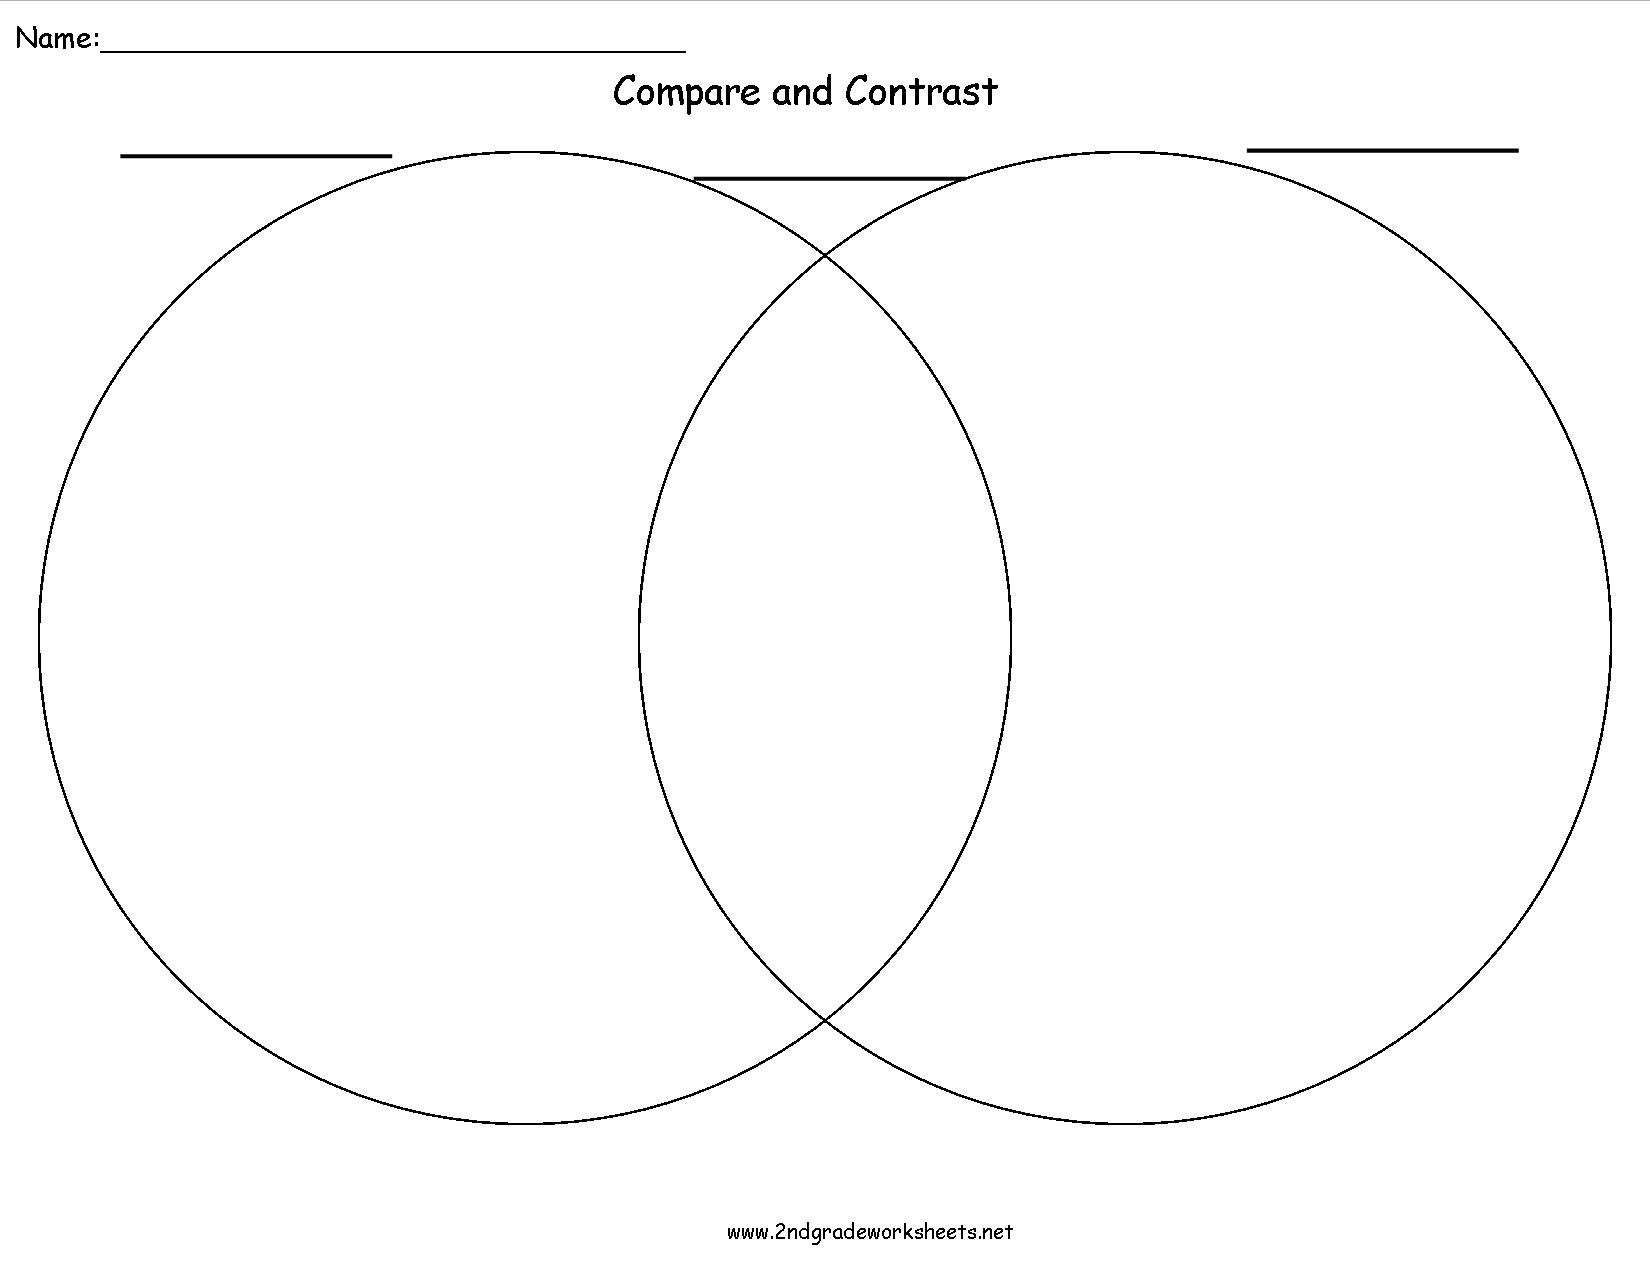 4-best-images-of-compare-and-contrast-worksheets-printable-compare-and-contrast-graphic